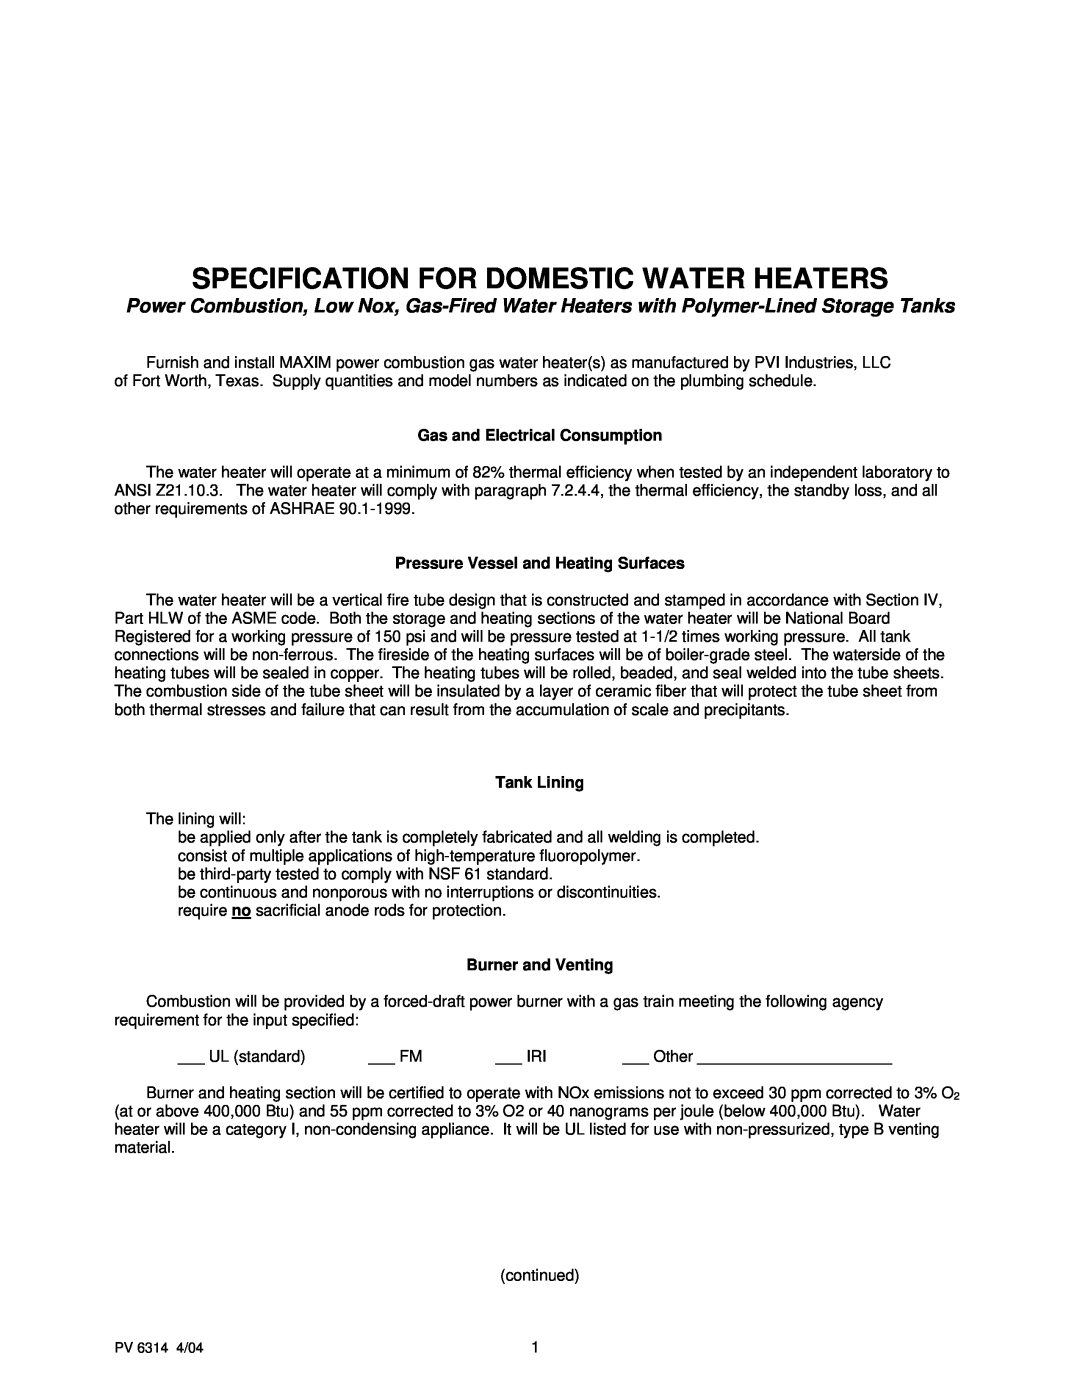 PVI Industries PV 6314 manual Specification For Domestic Water Heaters, Gas and Electrical Consumption, Tank Lining 